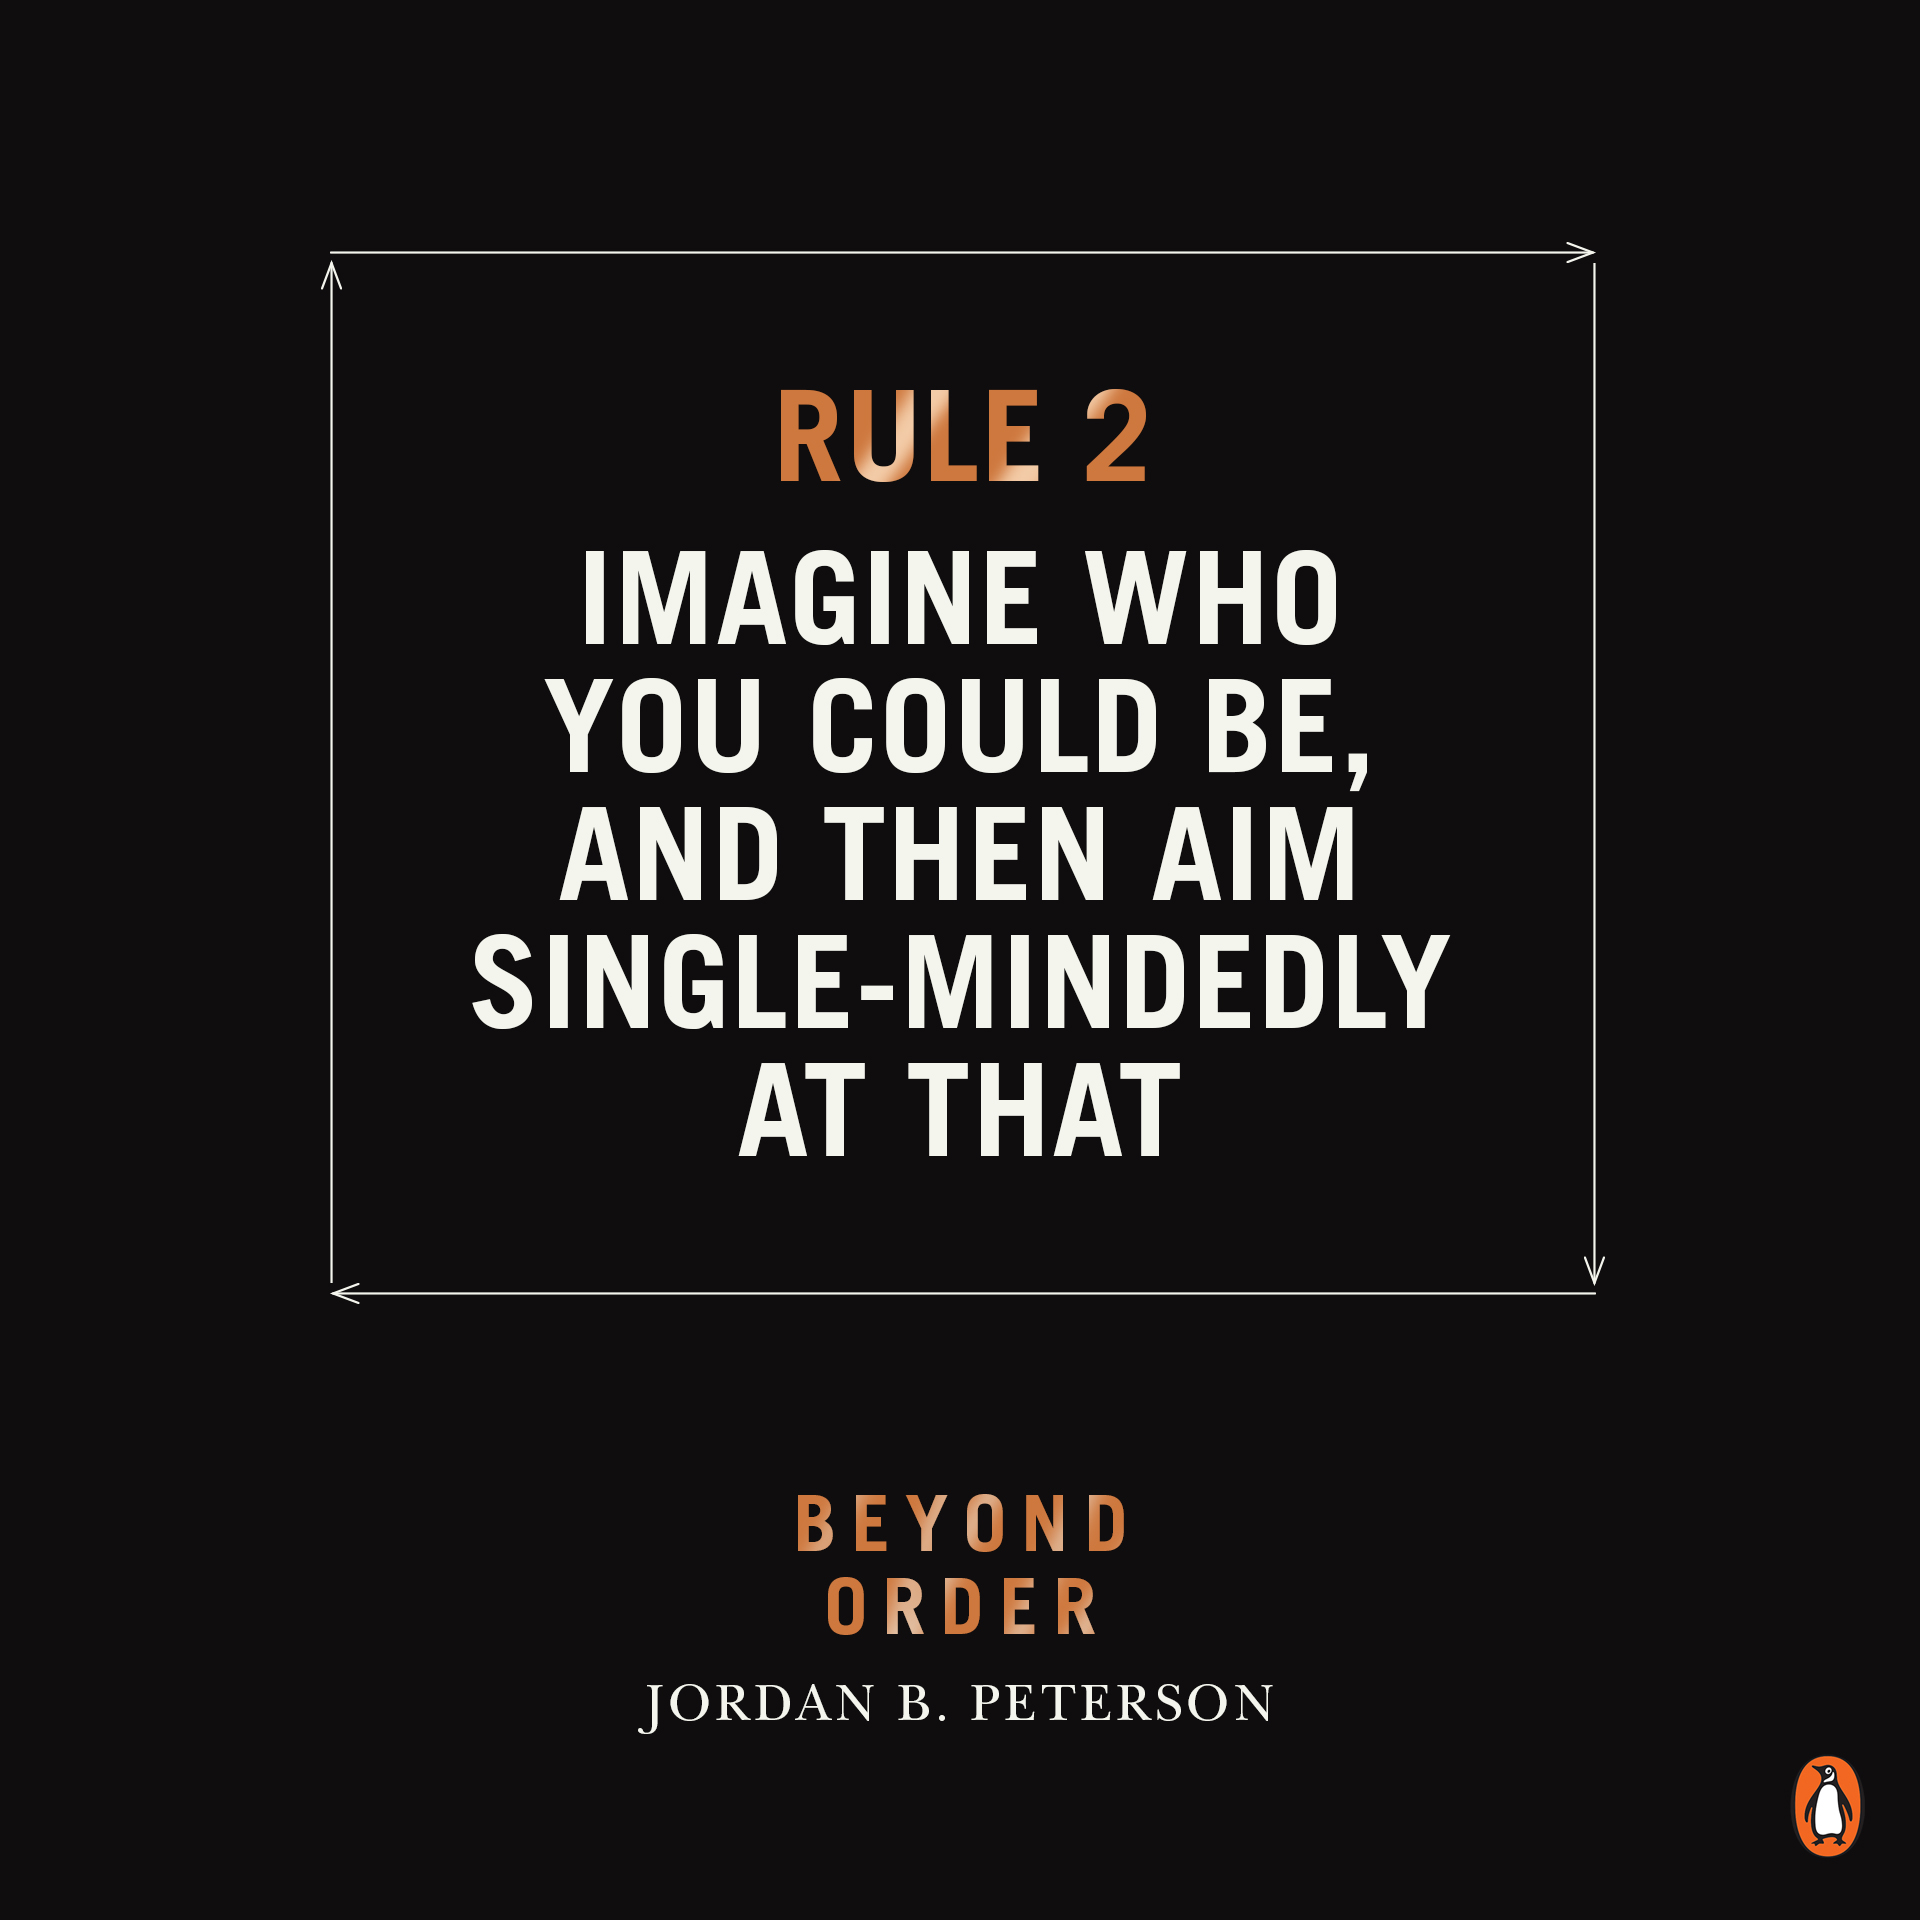 Dr Jordan Peterson on Twitter: "How do you know who you are? You are complex beyond your own understanding; complex than anything that exists, excepting other complex beyond